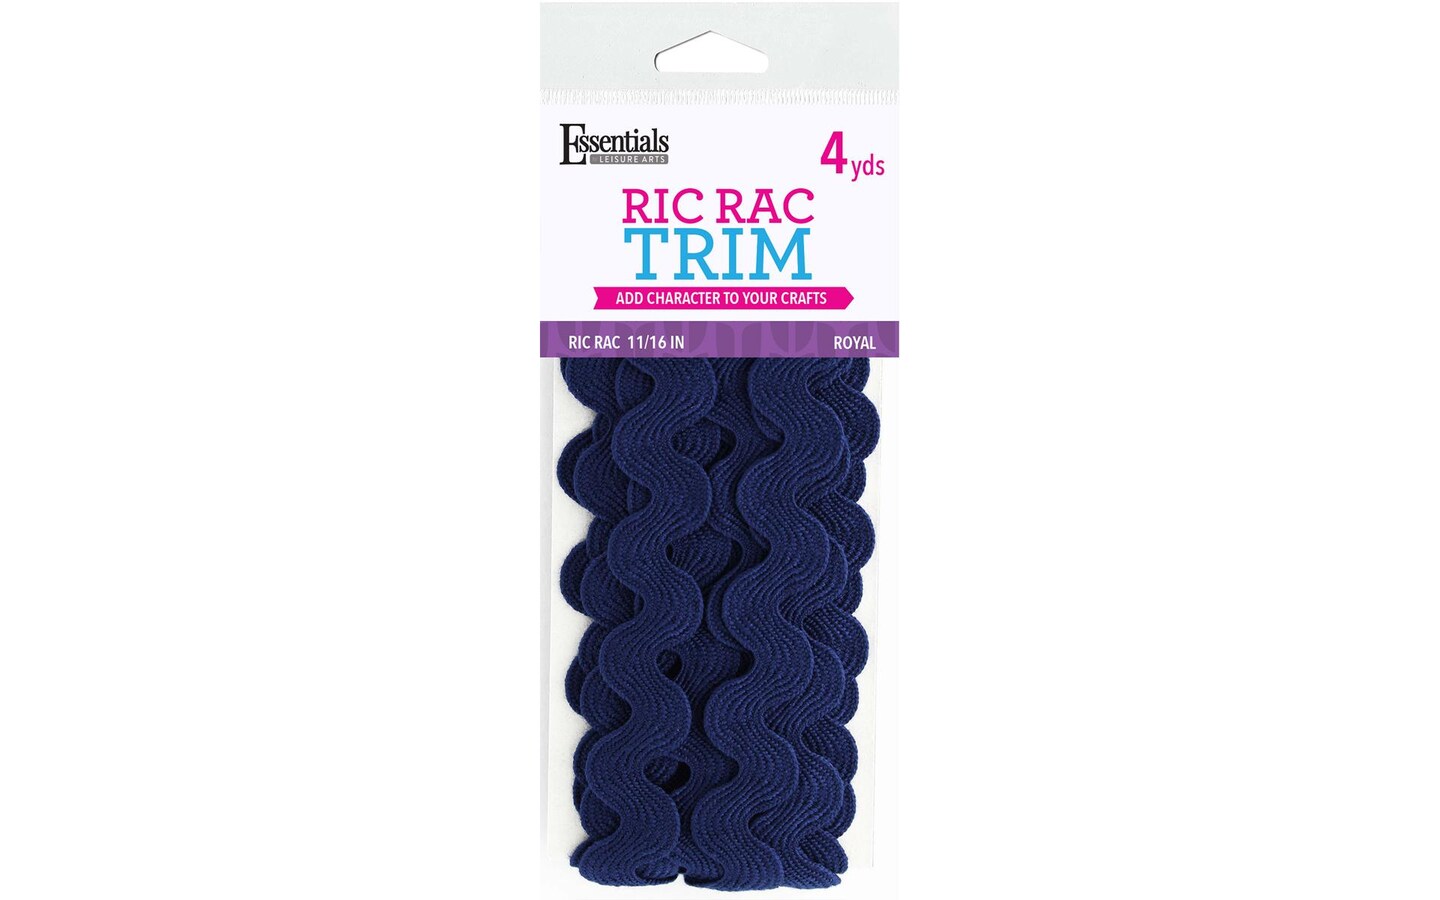 Essentials By Leisure Arts Ric Rac 11/16 4 yards Royal - rick rack trim  for sewing - wavy ric rac trim for sewing and crafts - ric rac ribbon - rick  rack trim royal